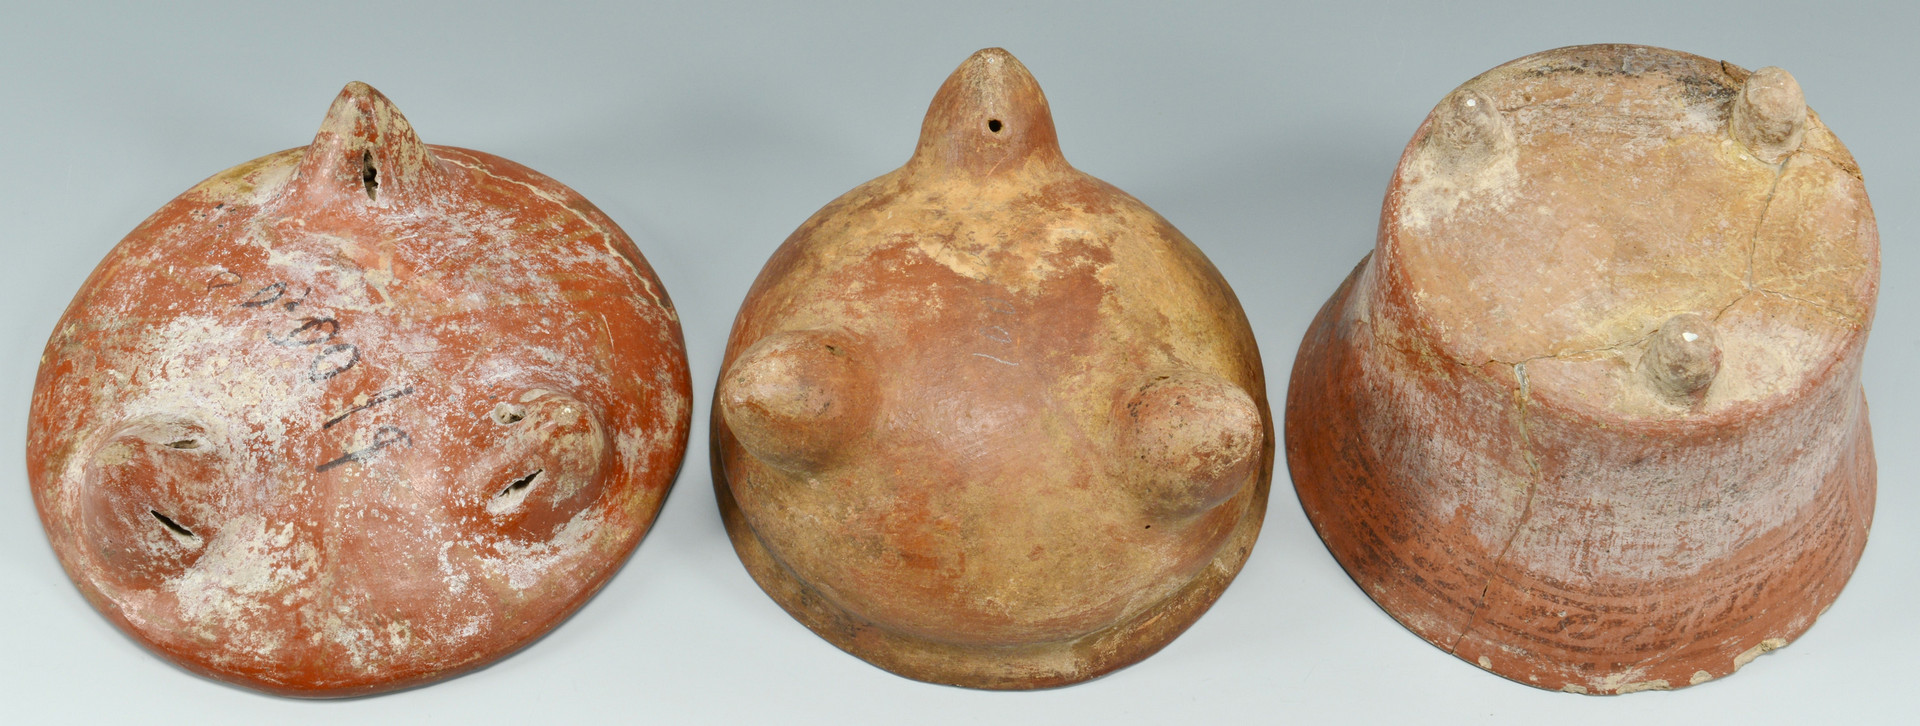 Lot 619: Group of 6 Pre Columbian vessels